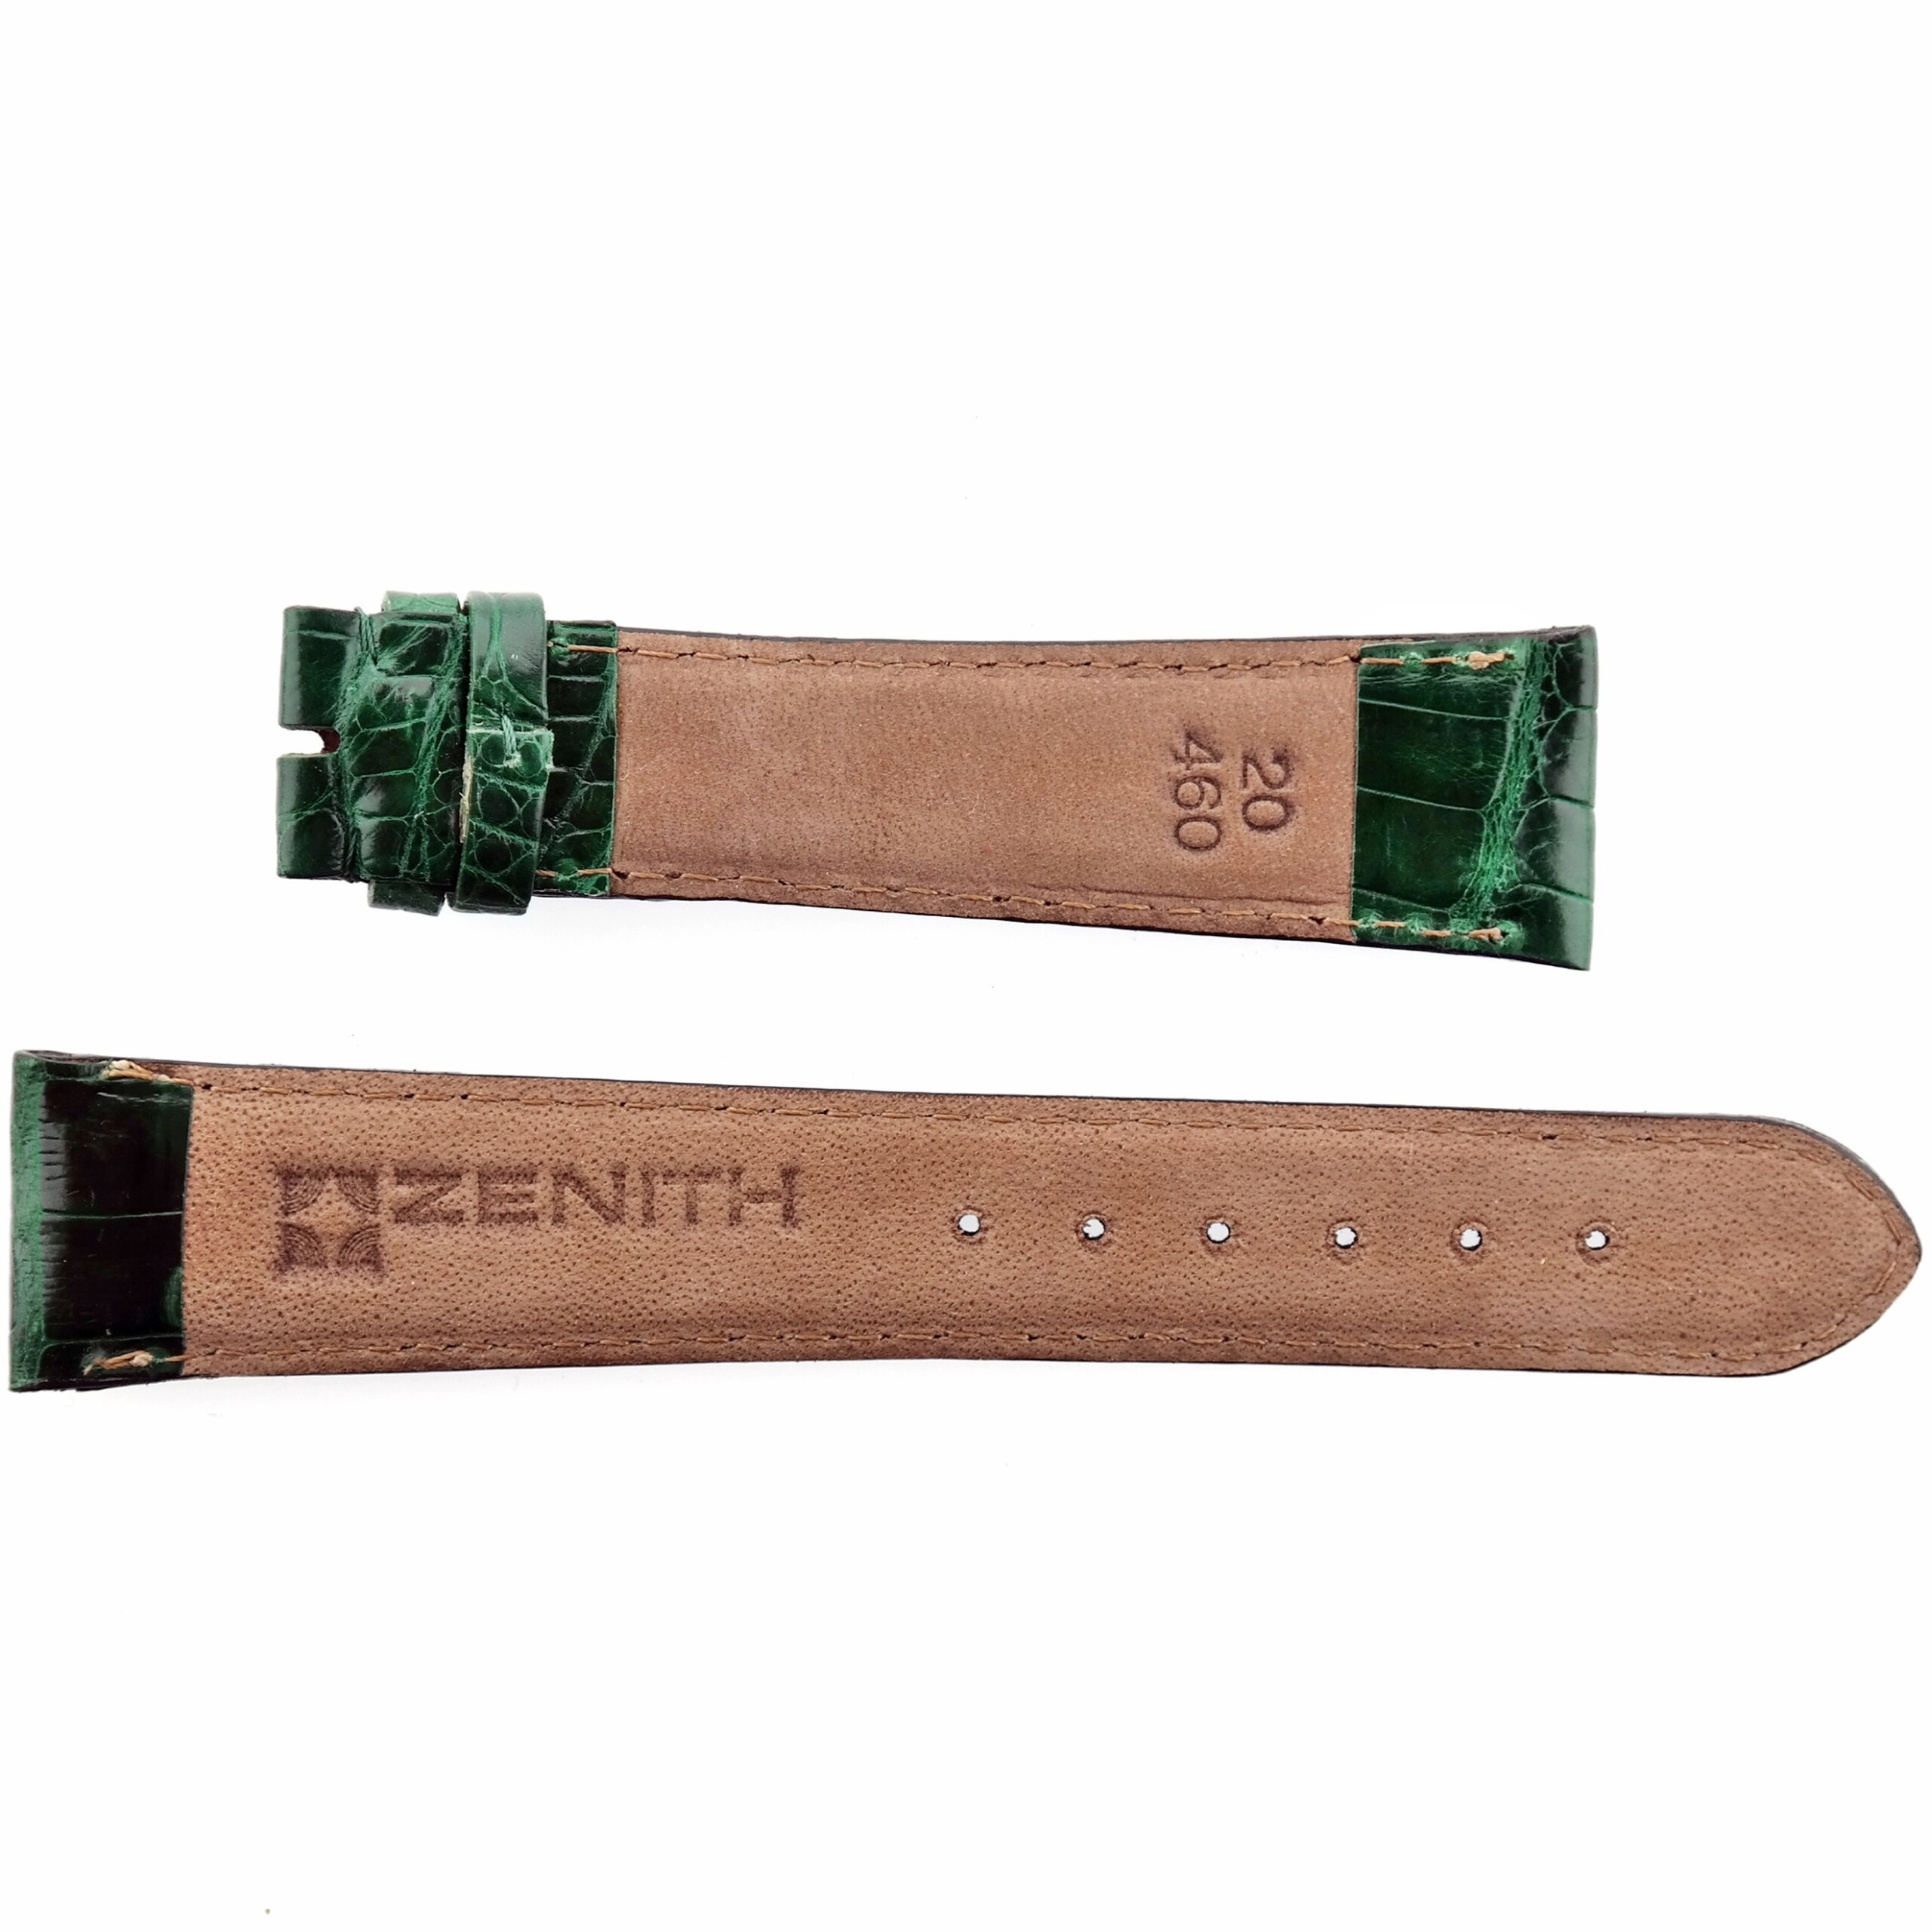 Authentic ZENITH - 20-460 - Leather Watch Strap - Swiss Made - 20 mm